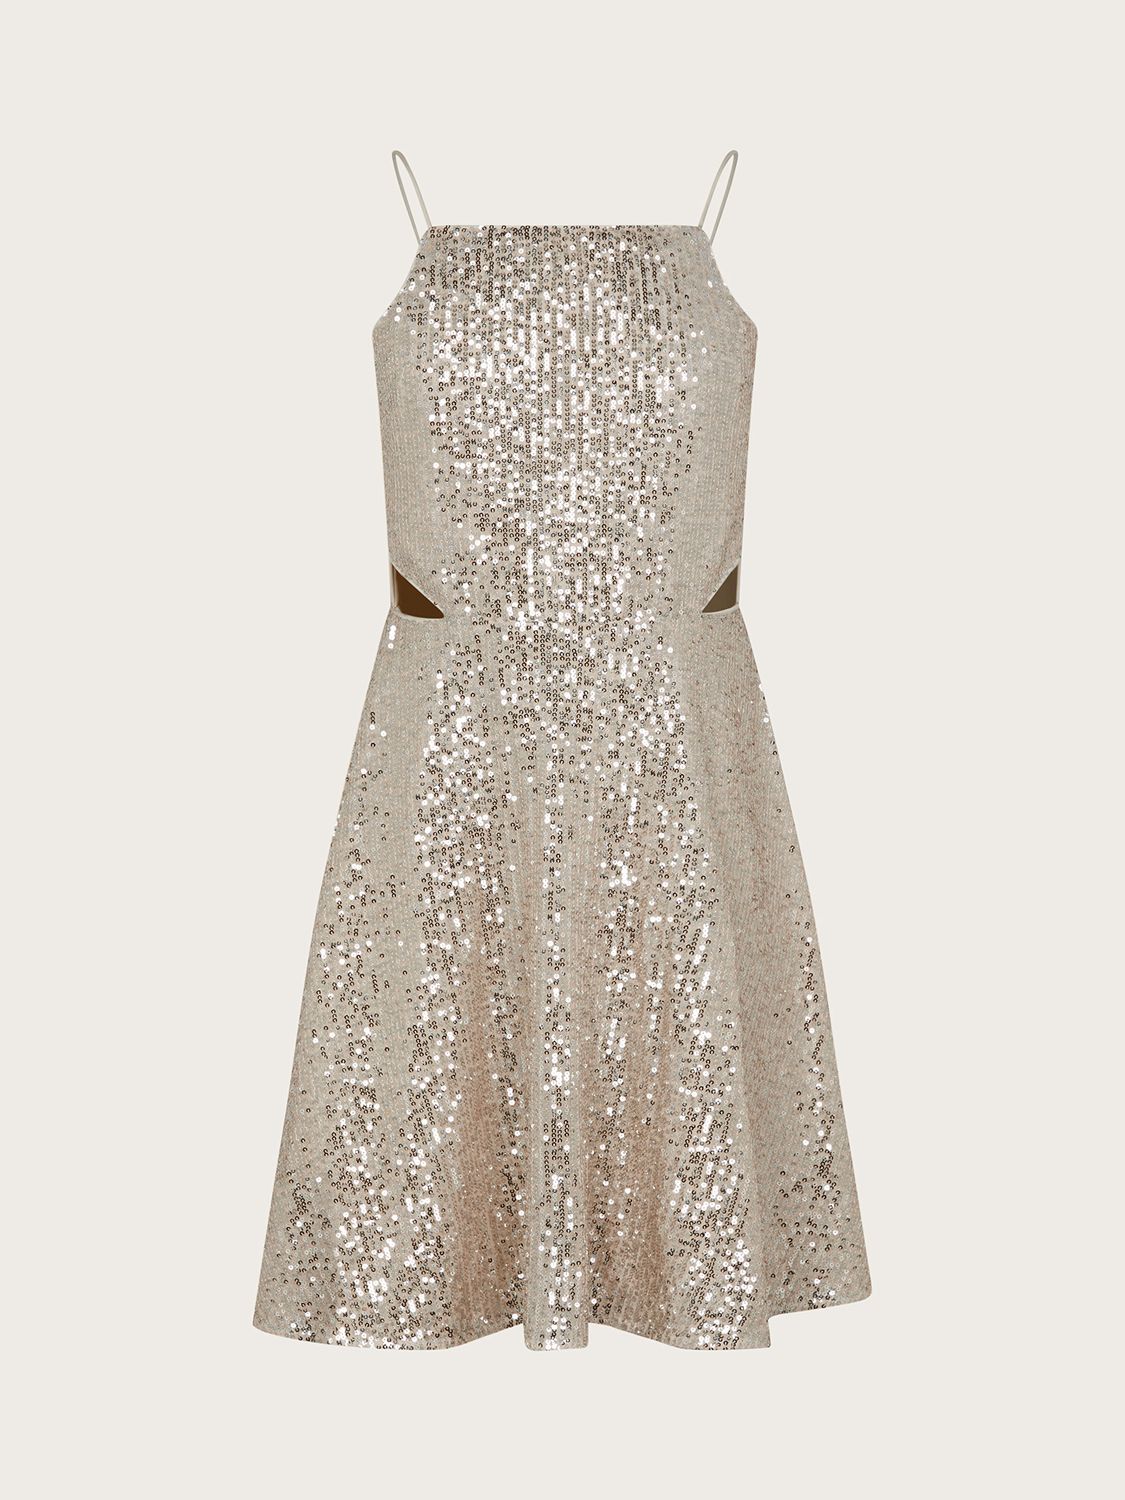 Monsoon Kids' Charlotte Sequin Cut Out Party Dress, Champagne, 14 years